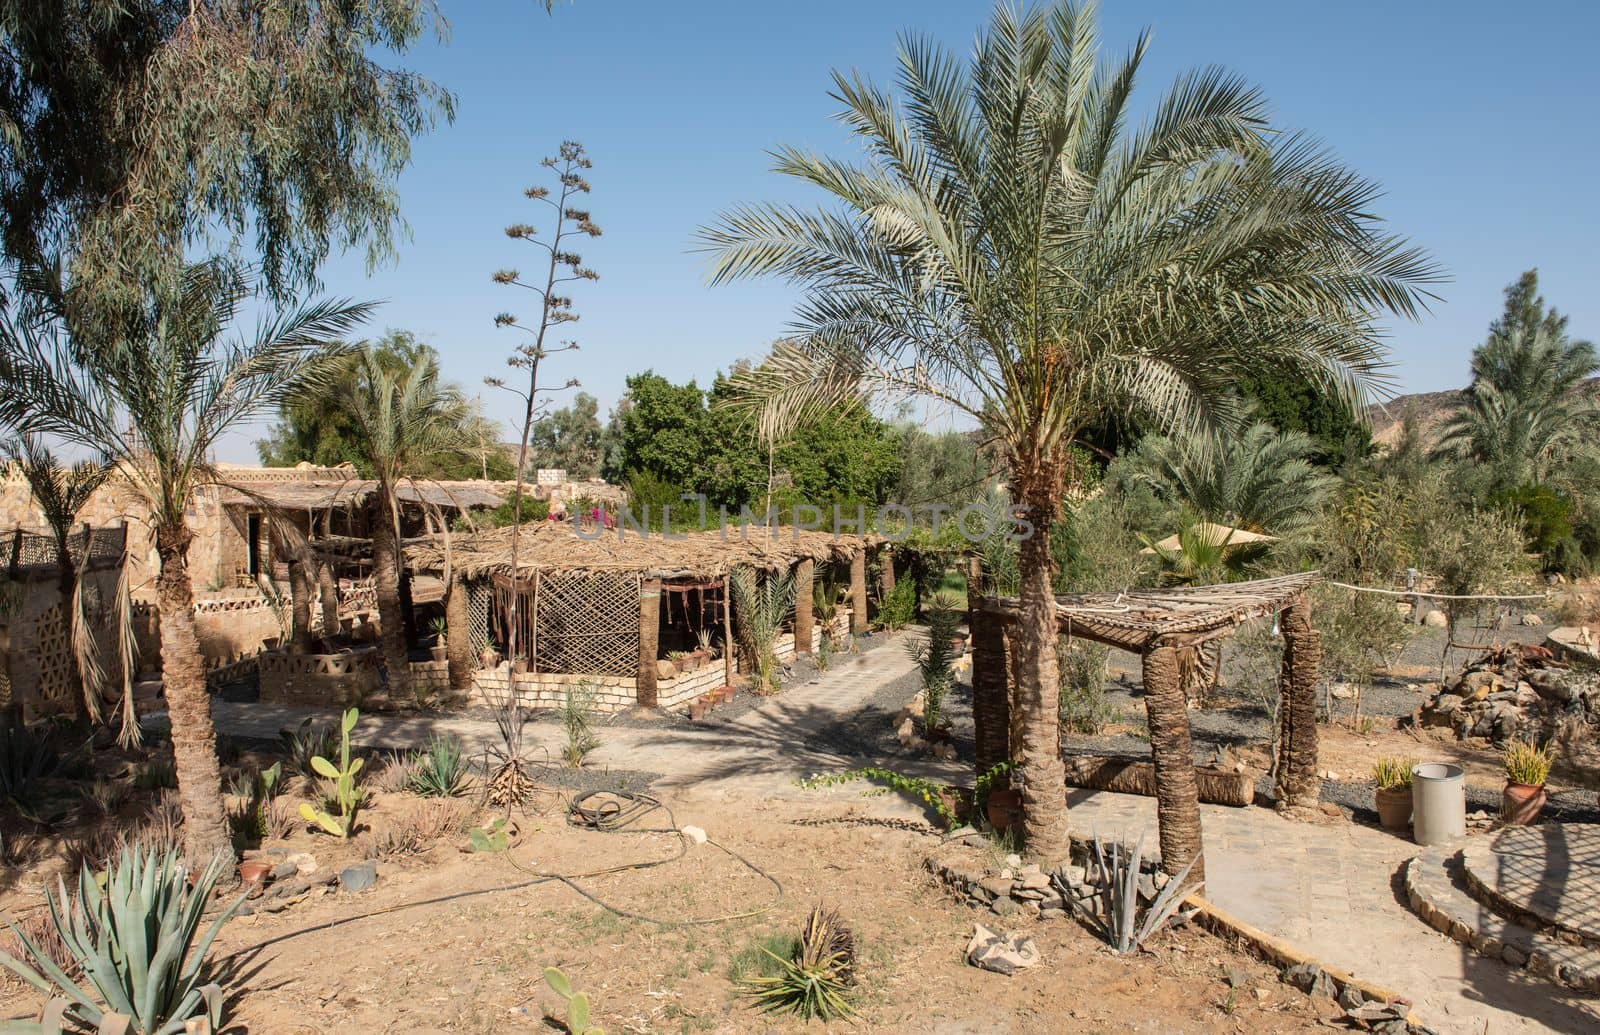 Outdoor area of rural eco lodge in egyptian villlage with desert garden and palm trees